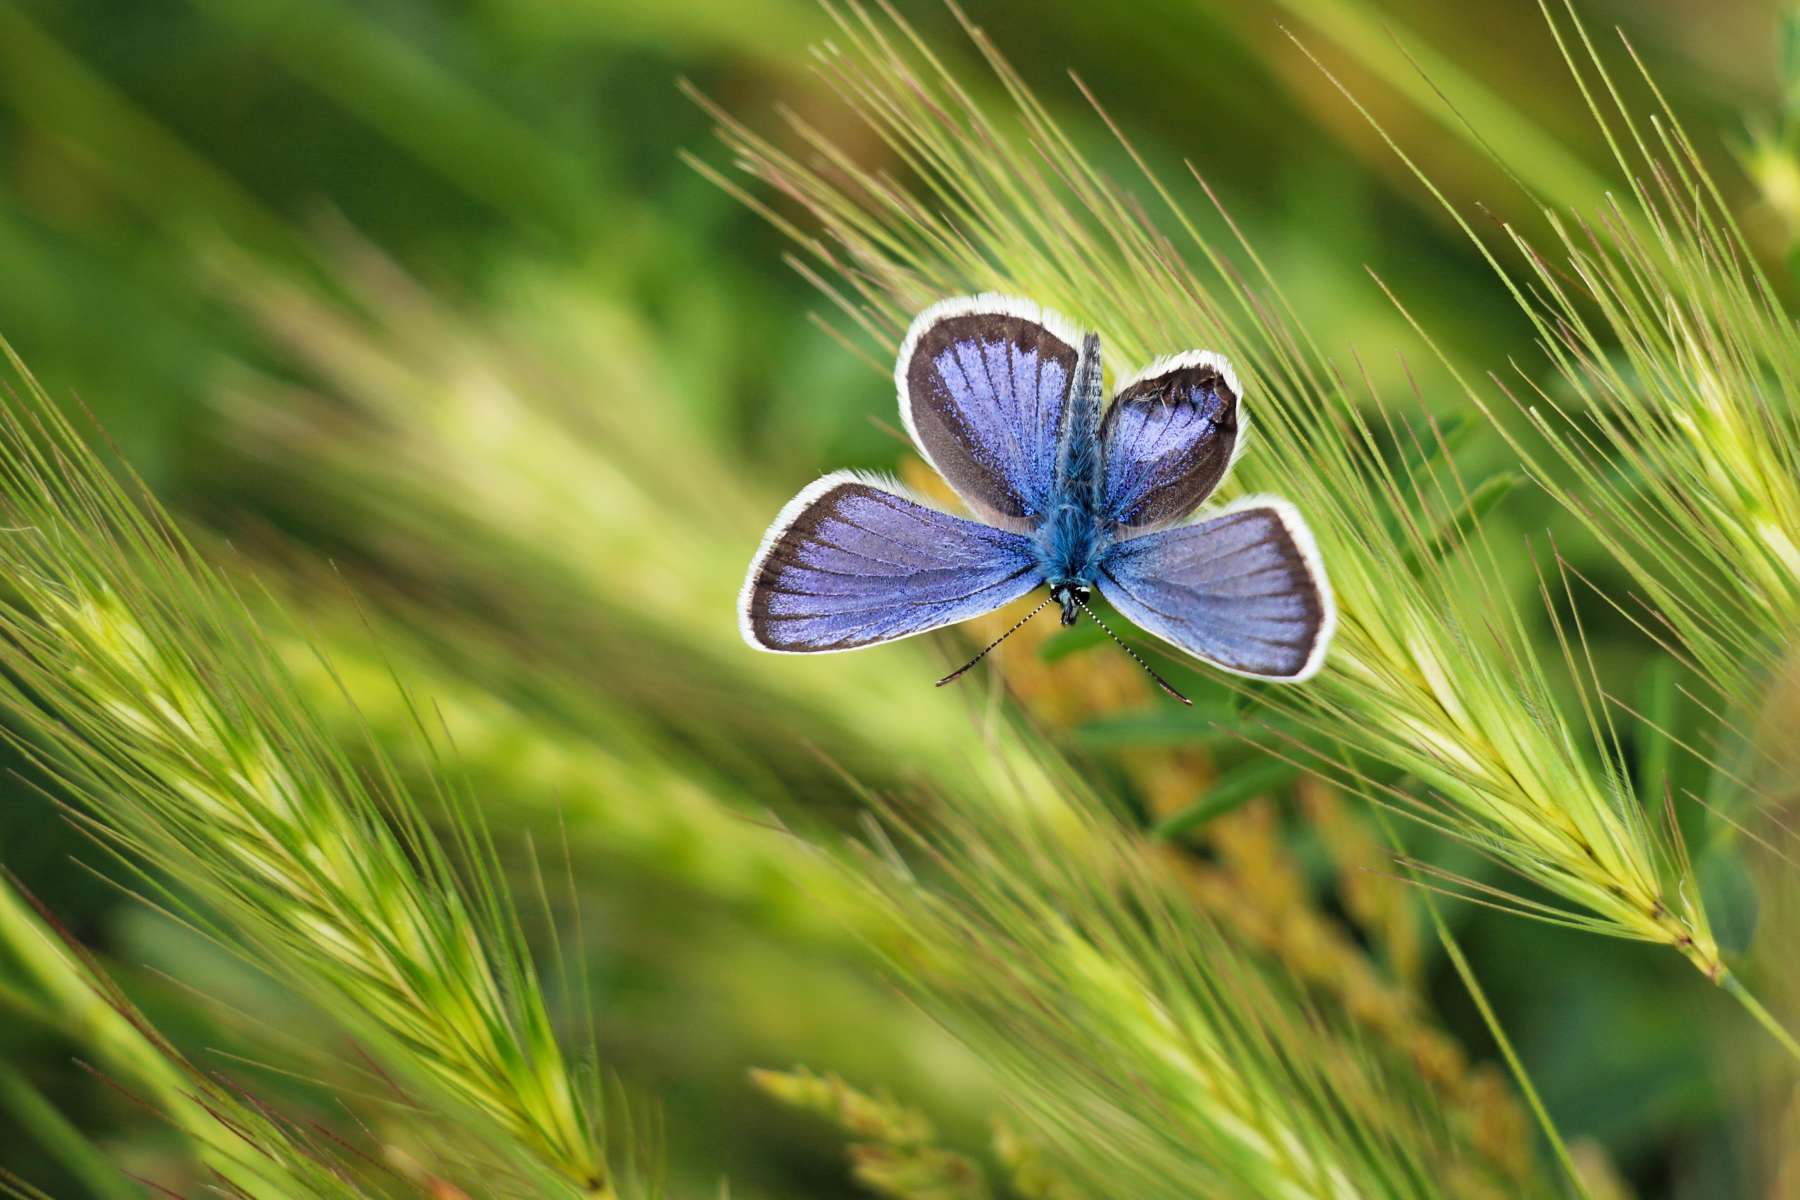      PhotoGeek.ru # #Butterfly #Insects #Nature # # # # # # # # #